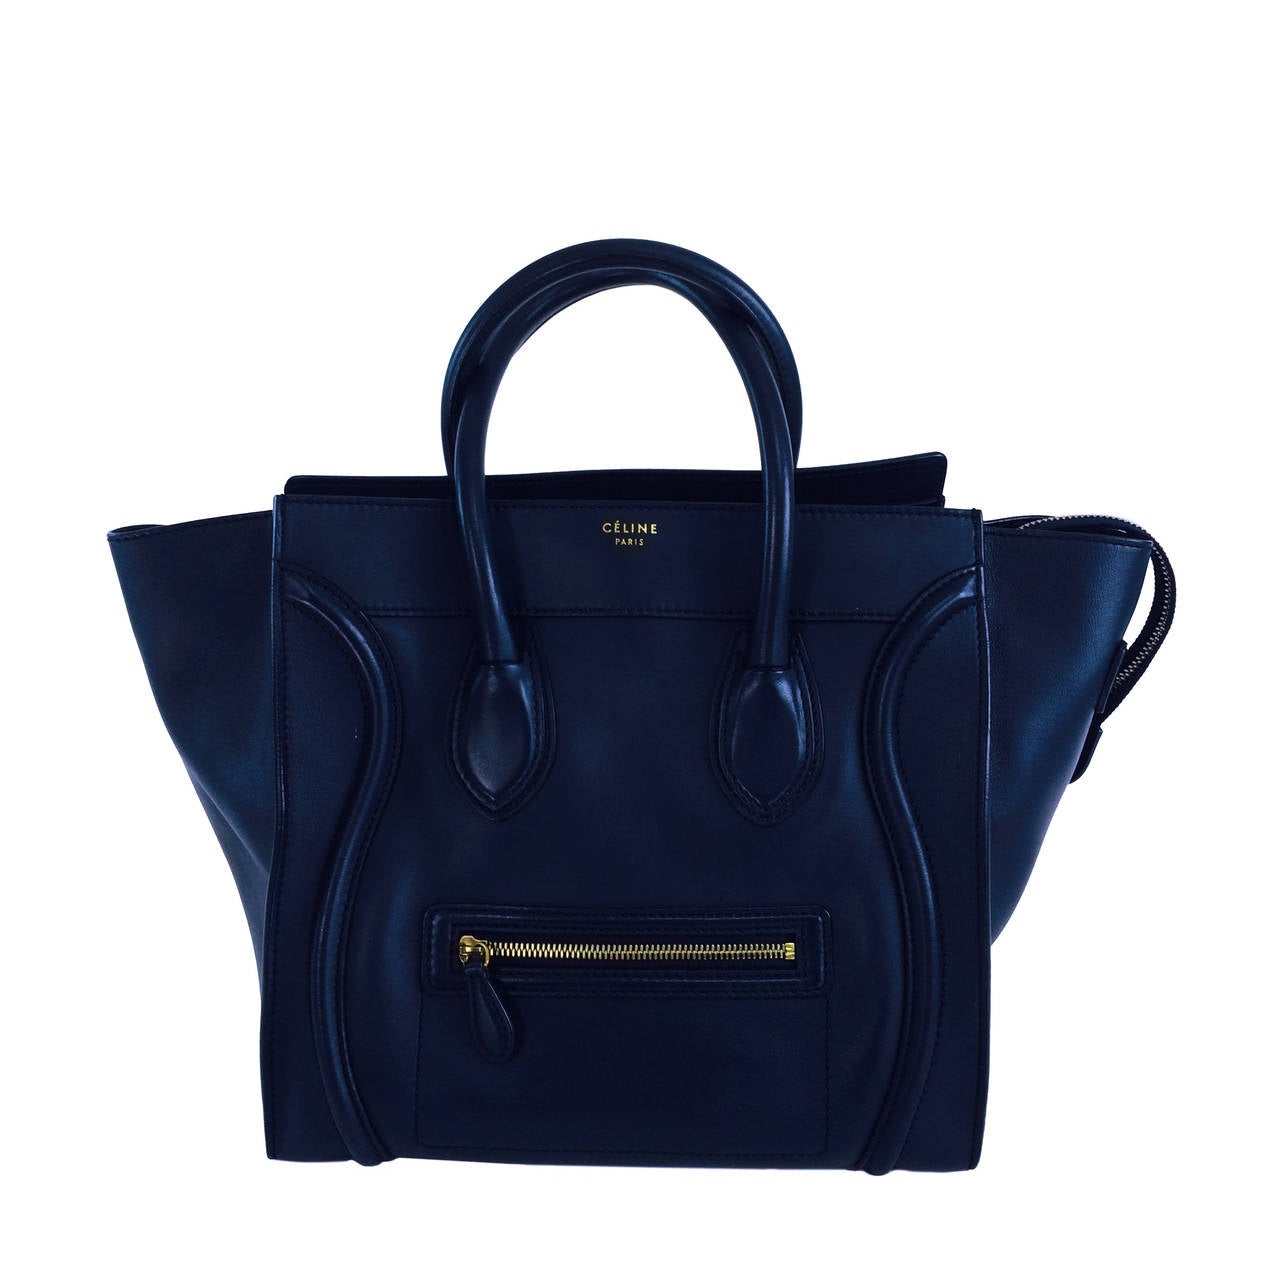 Celine mini luggage tote in navy blue smooth leather